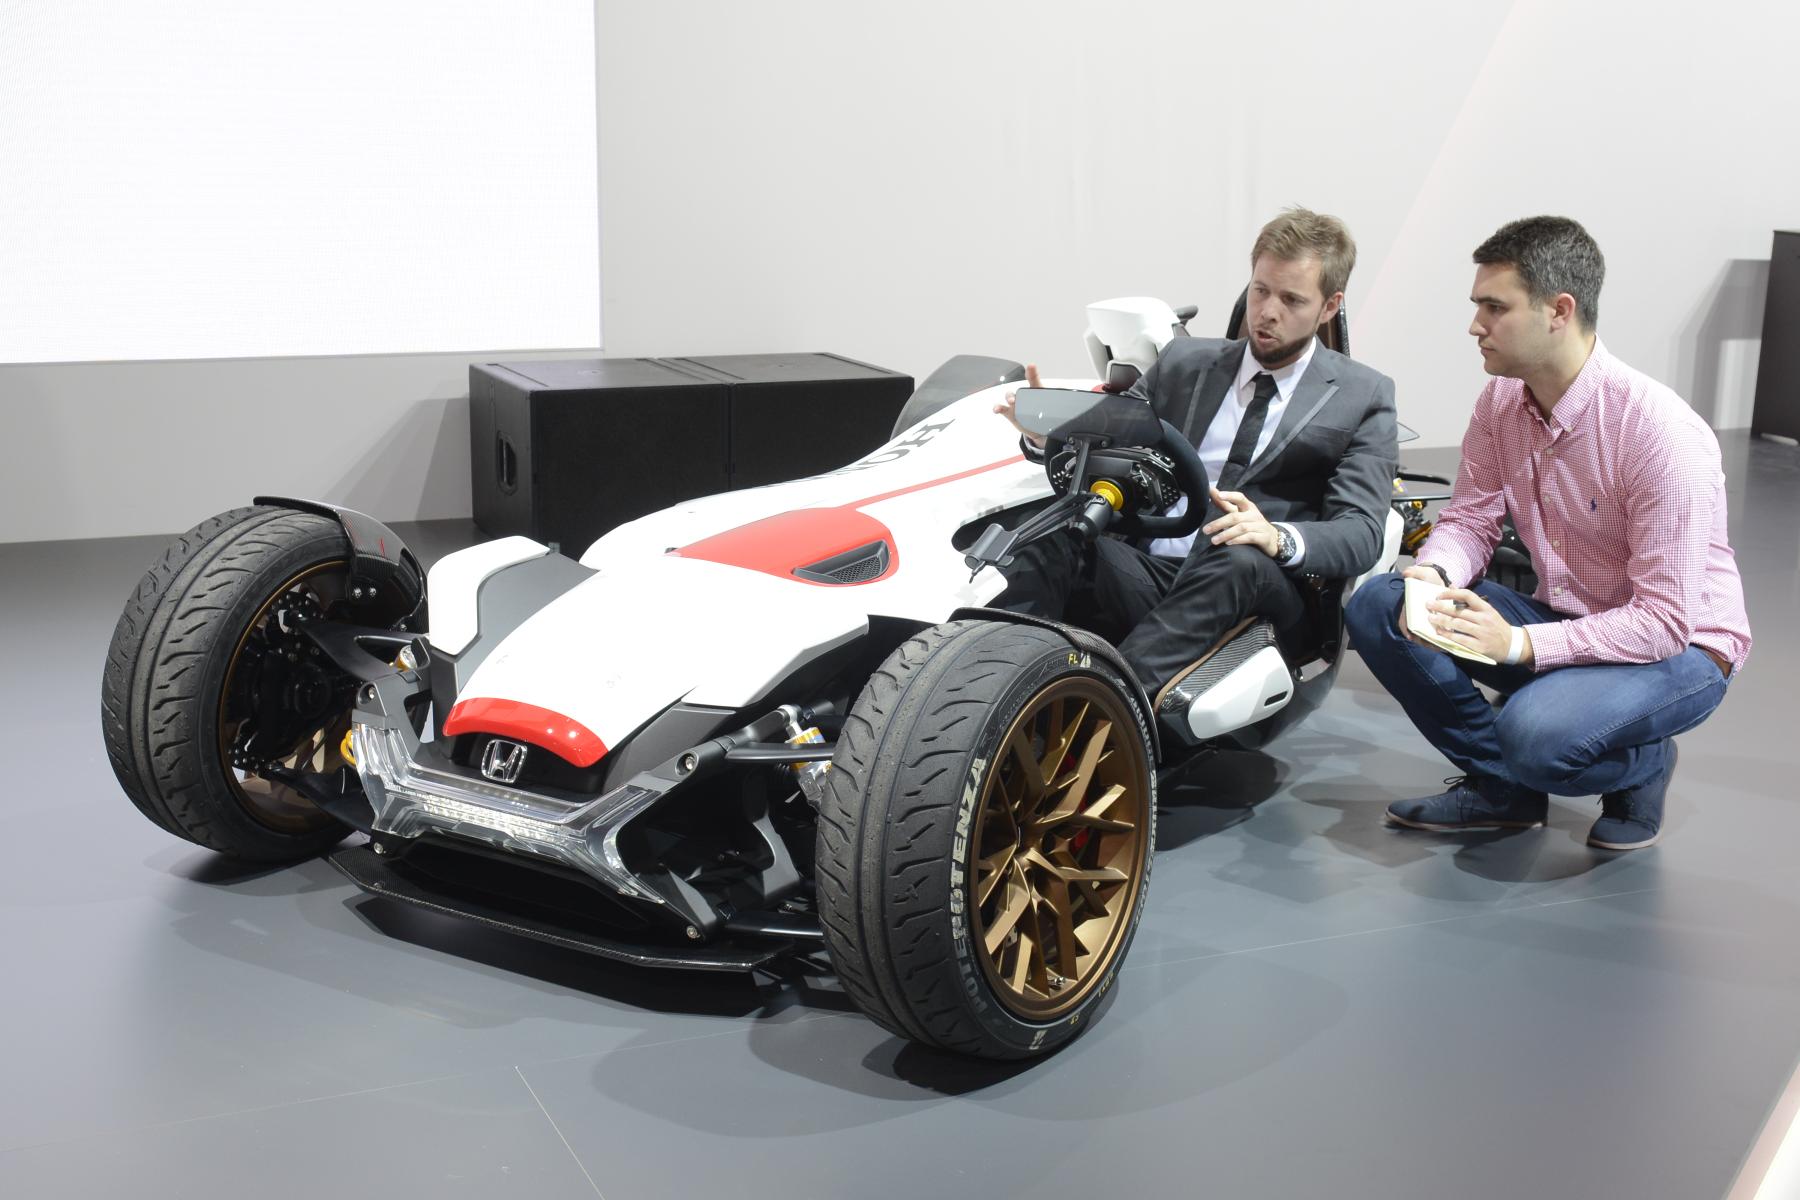 Honda 2&4 concept revealed, possible KTM X-Bow rival?